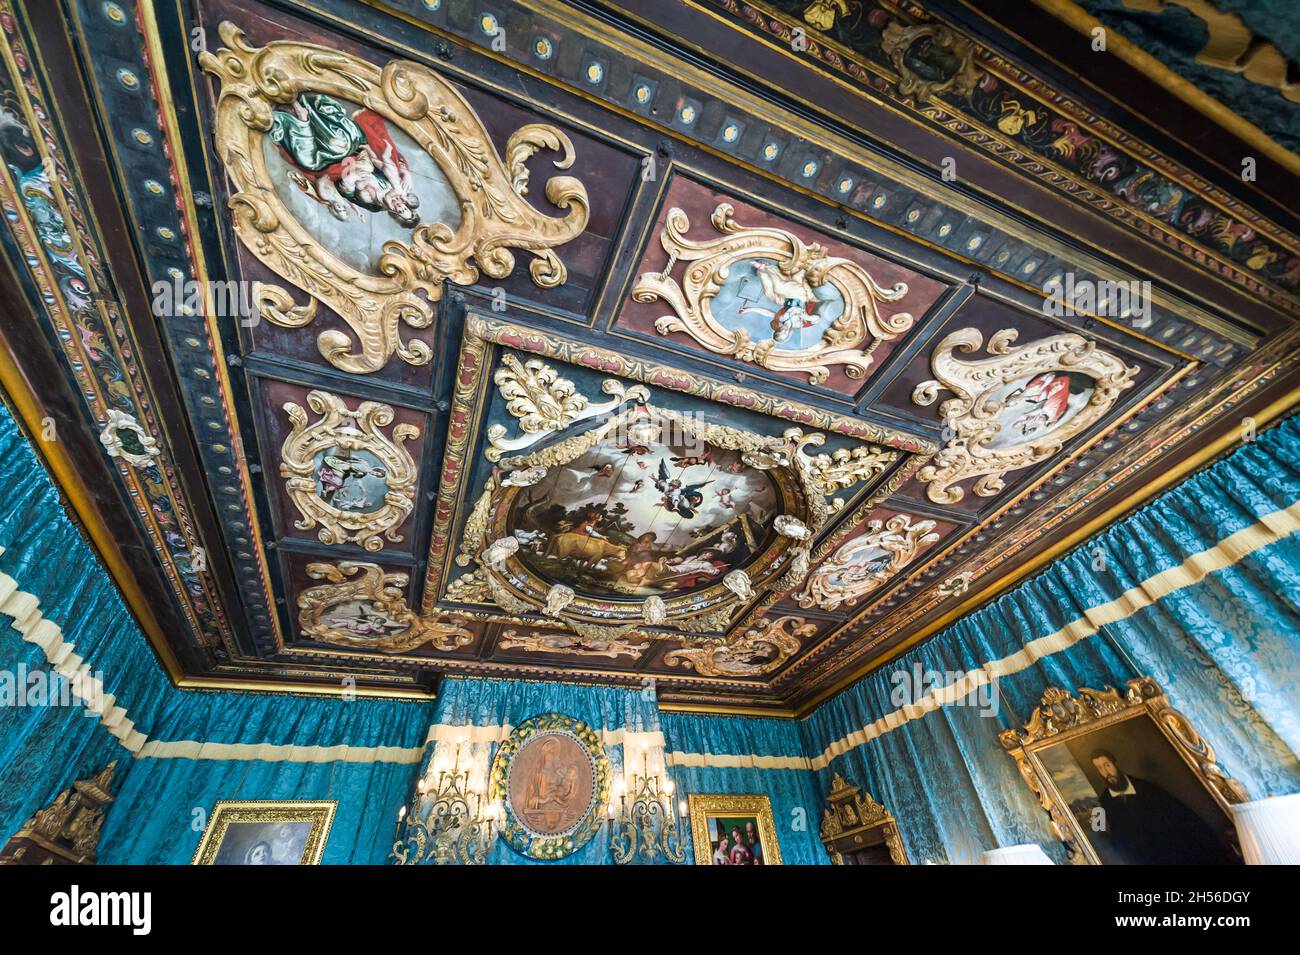 California, USA, 09 Jun 2013: Beautiful paintings and carvings of ceiling in popular Hearst Castle, which is a National and California Historical Land Stock Photo